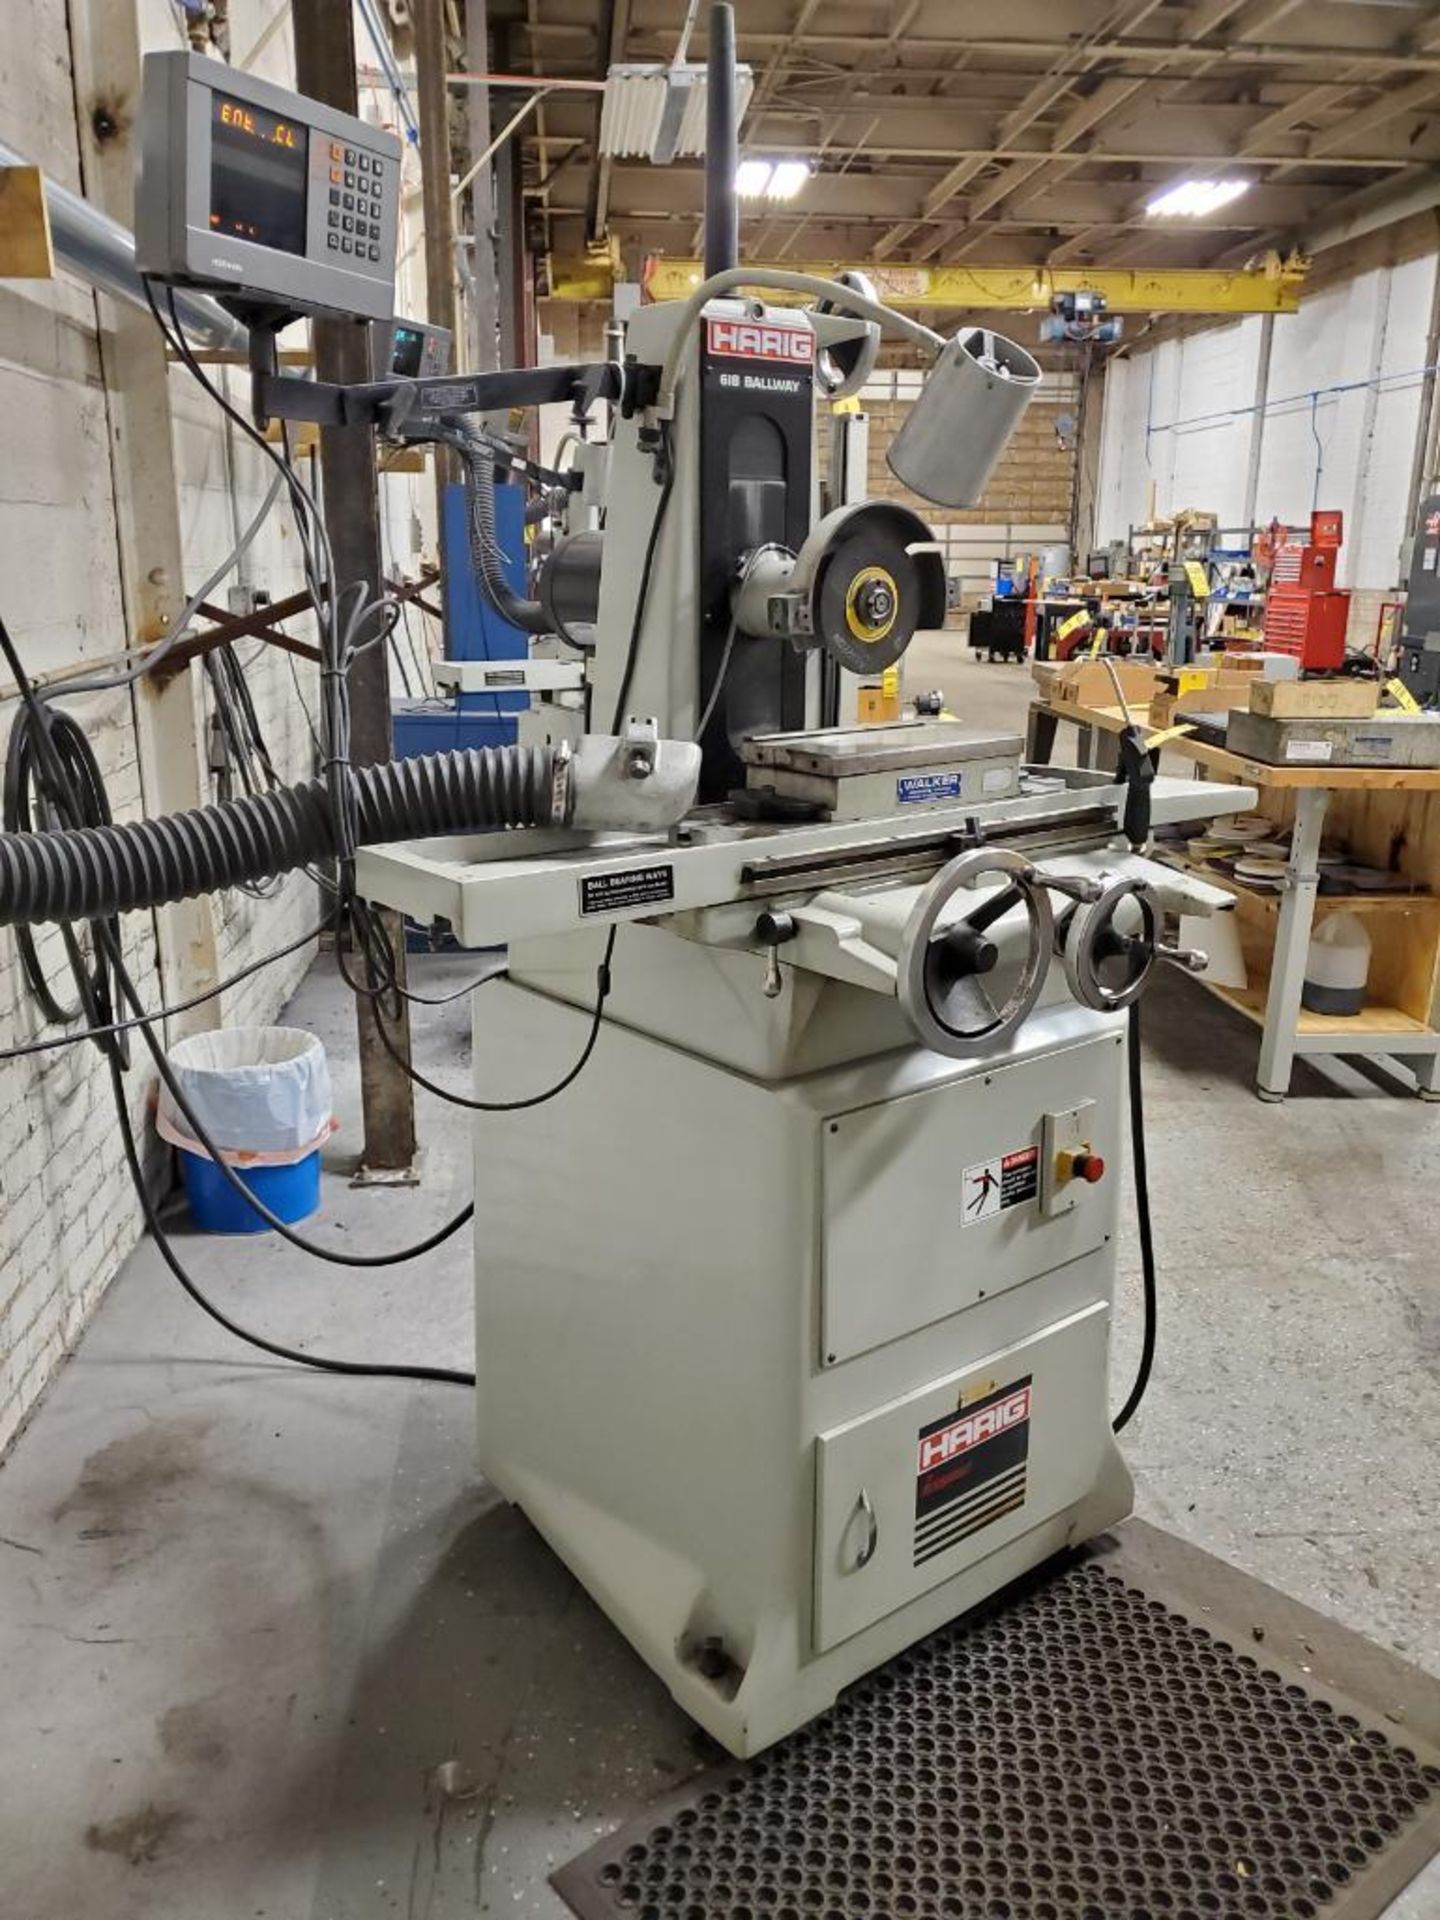 Harig 618 Ballway Automatic Surface Grinder, Heidenhain 2-Axis DRO Control, Walker 12" X 6" PMC, Lig - Image 2 of 7